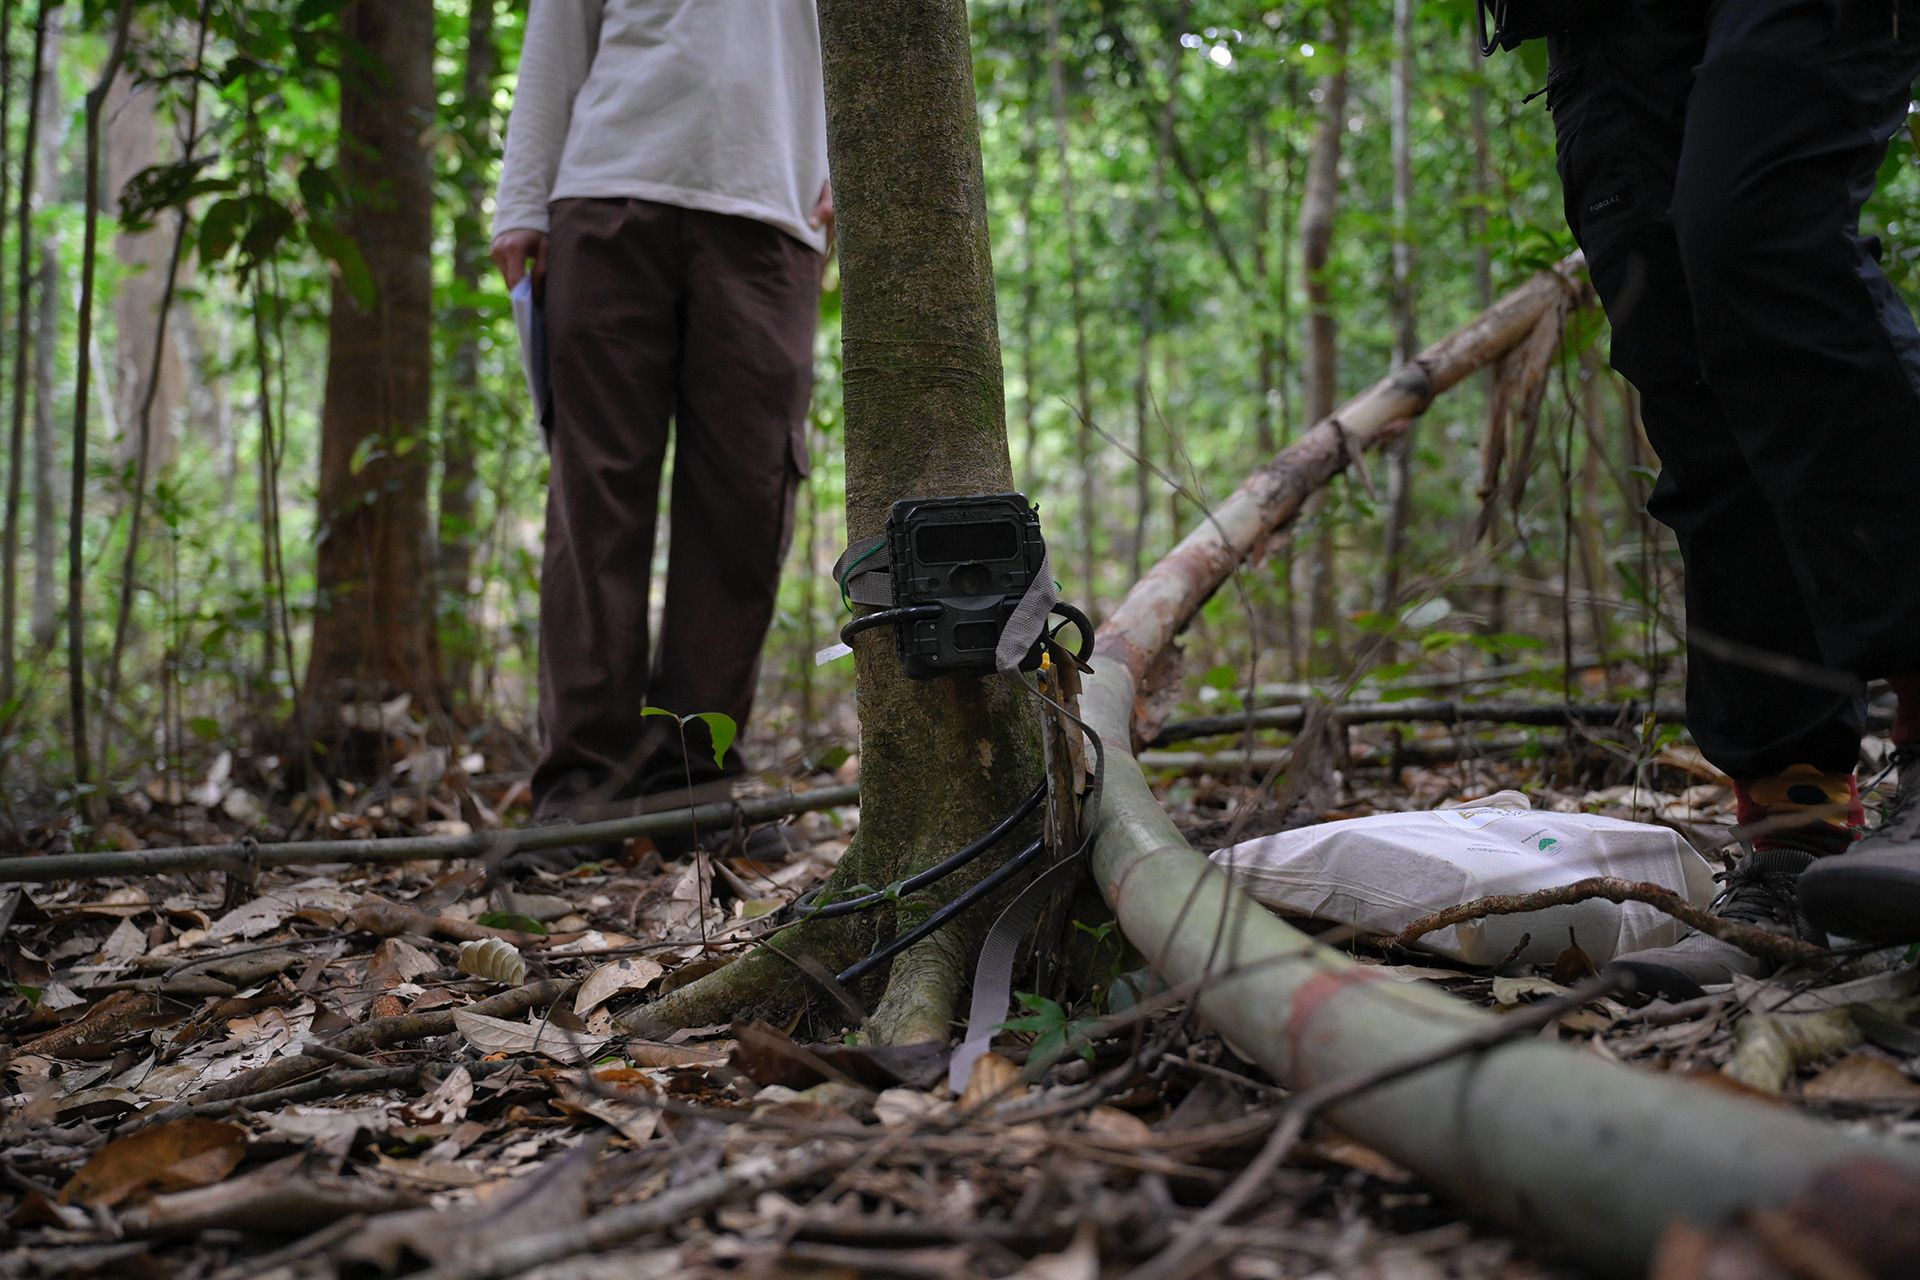 A camera trap used by NParks researchers to aid their monitoring of forest plots.